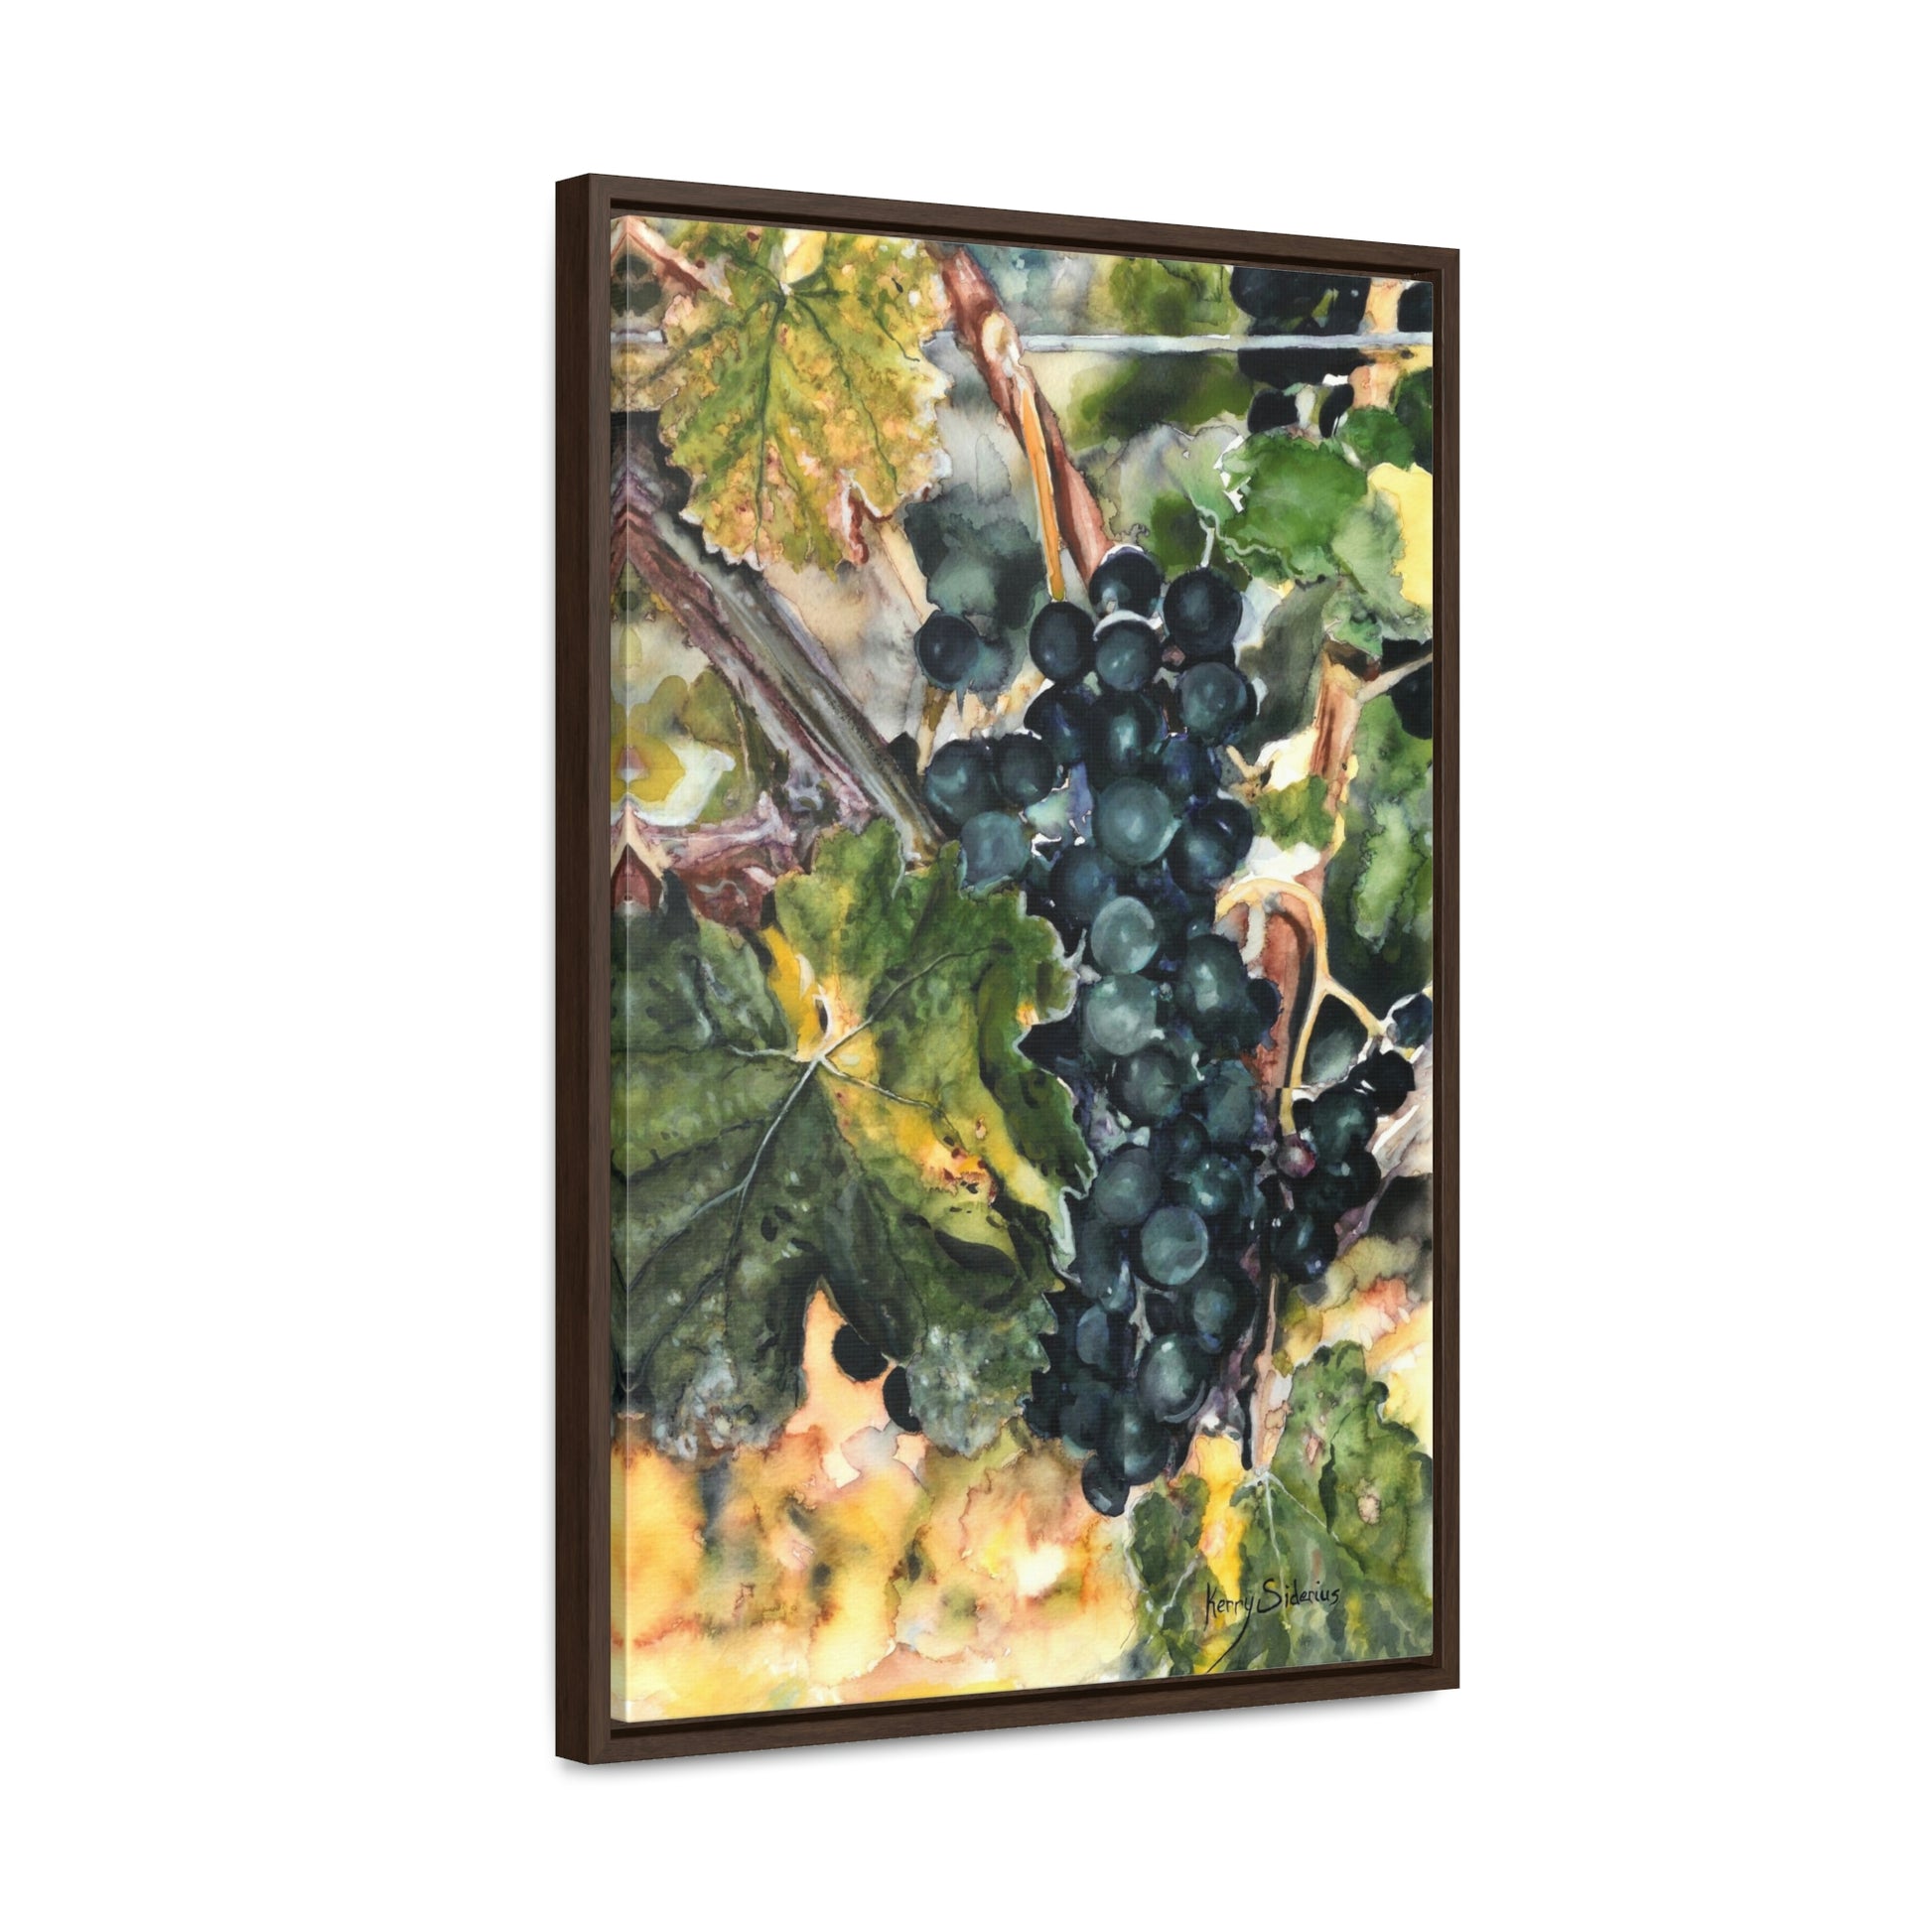 "Merlot Grapes in Manson" Gallery Wrapped Wood Framed Canvas - Kerry Siderius Art 